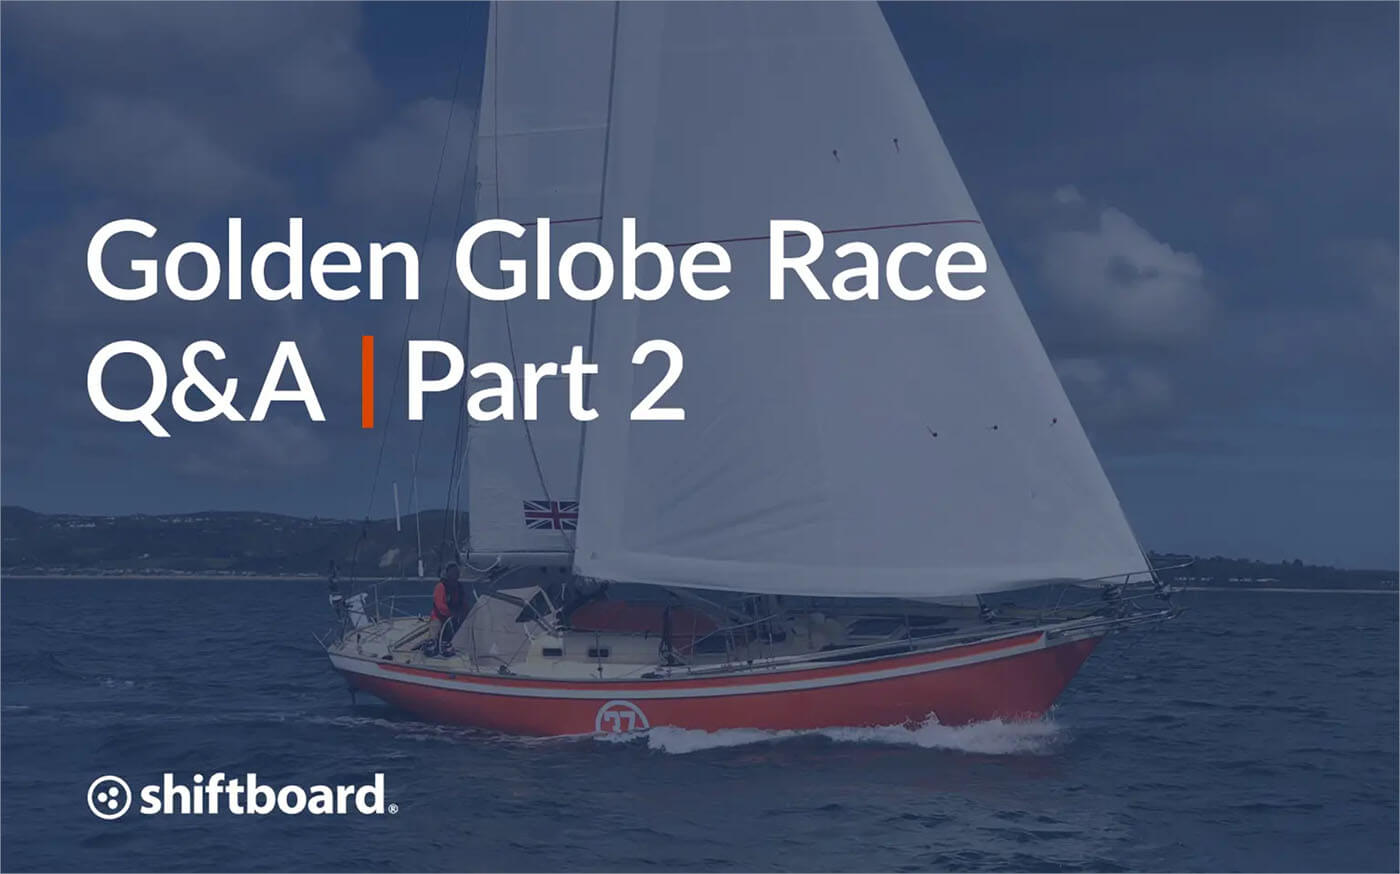 Ian’s Preparations for the Golden Globe Race